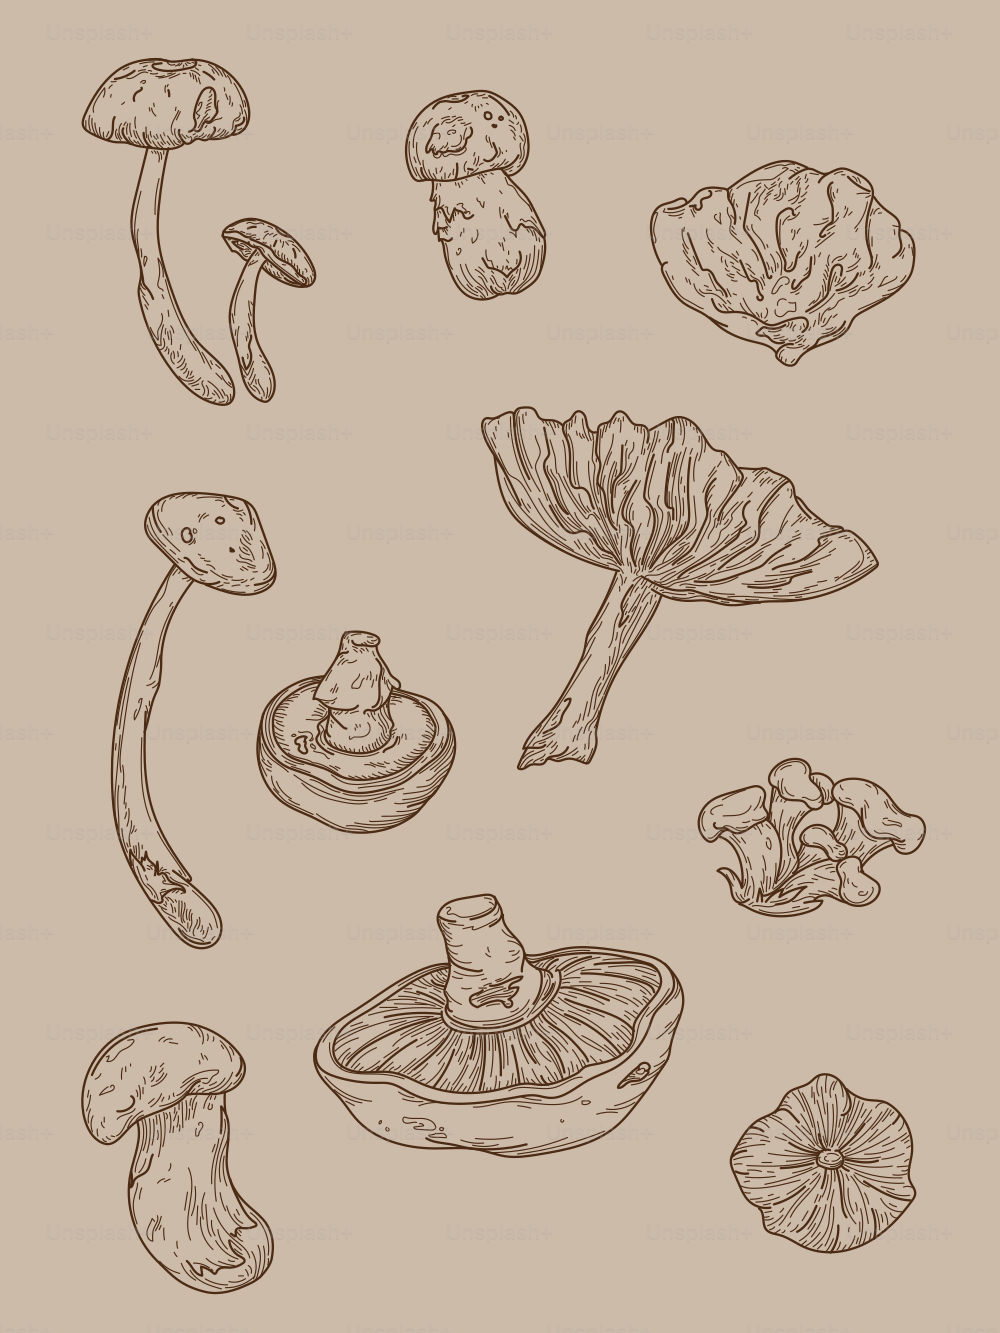 A set of line artwork forest mushrooms in neutral tones.